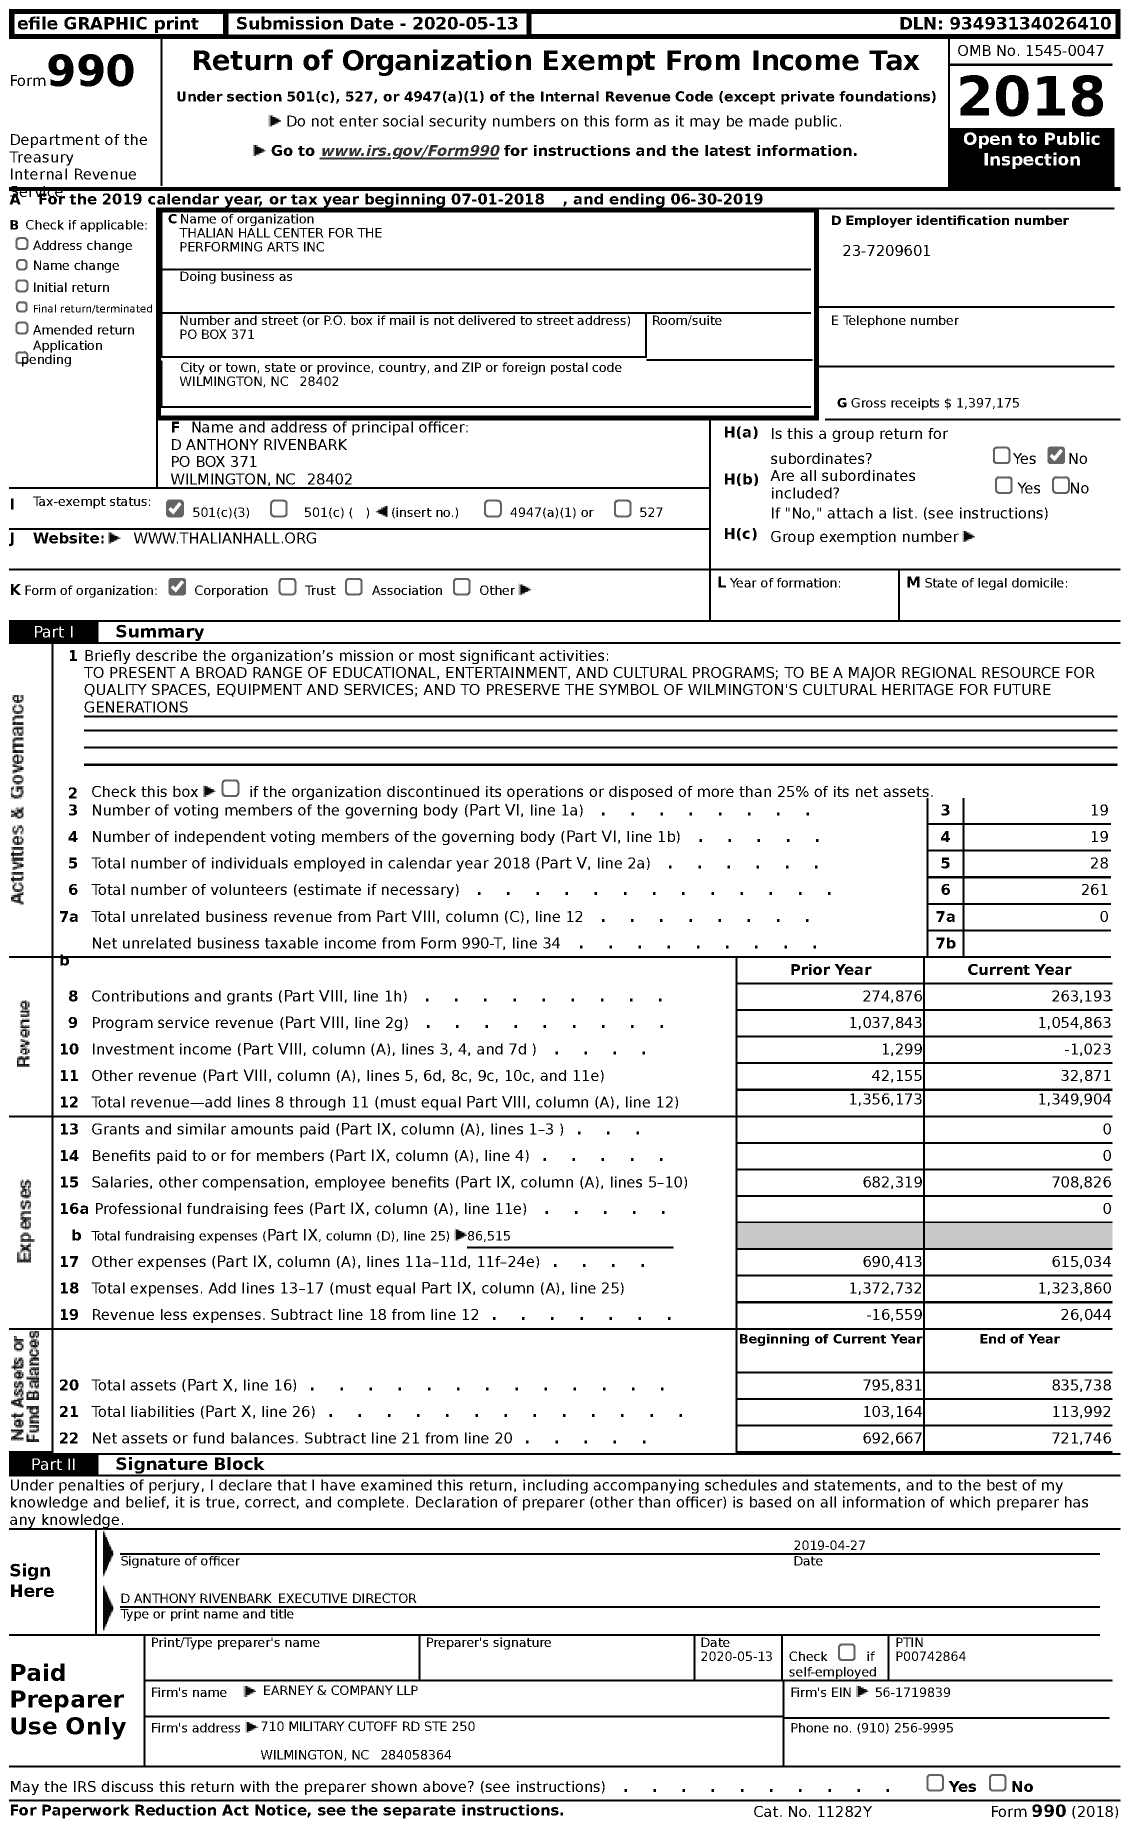 Image of first page of 2018 Form 990 for Thalian Hall Center for the Performing Arts Incorporated